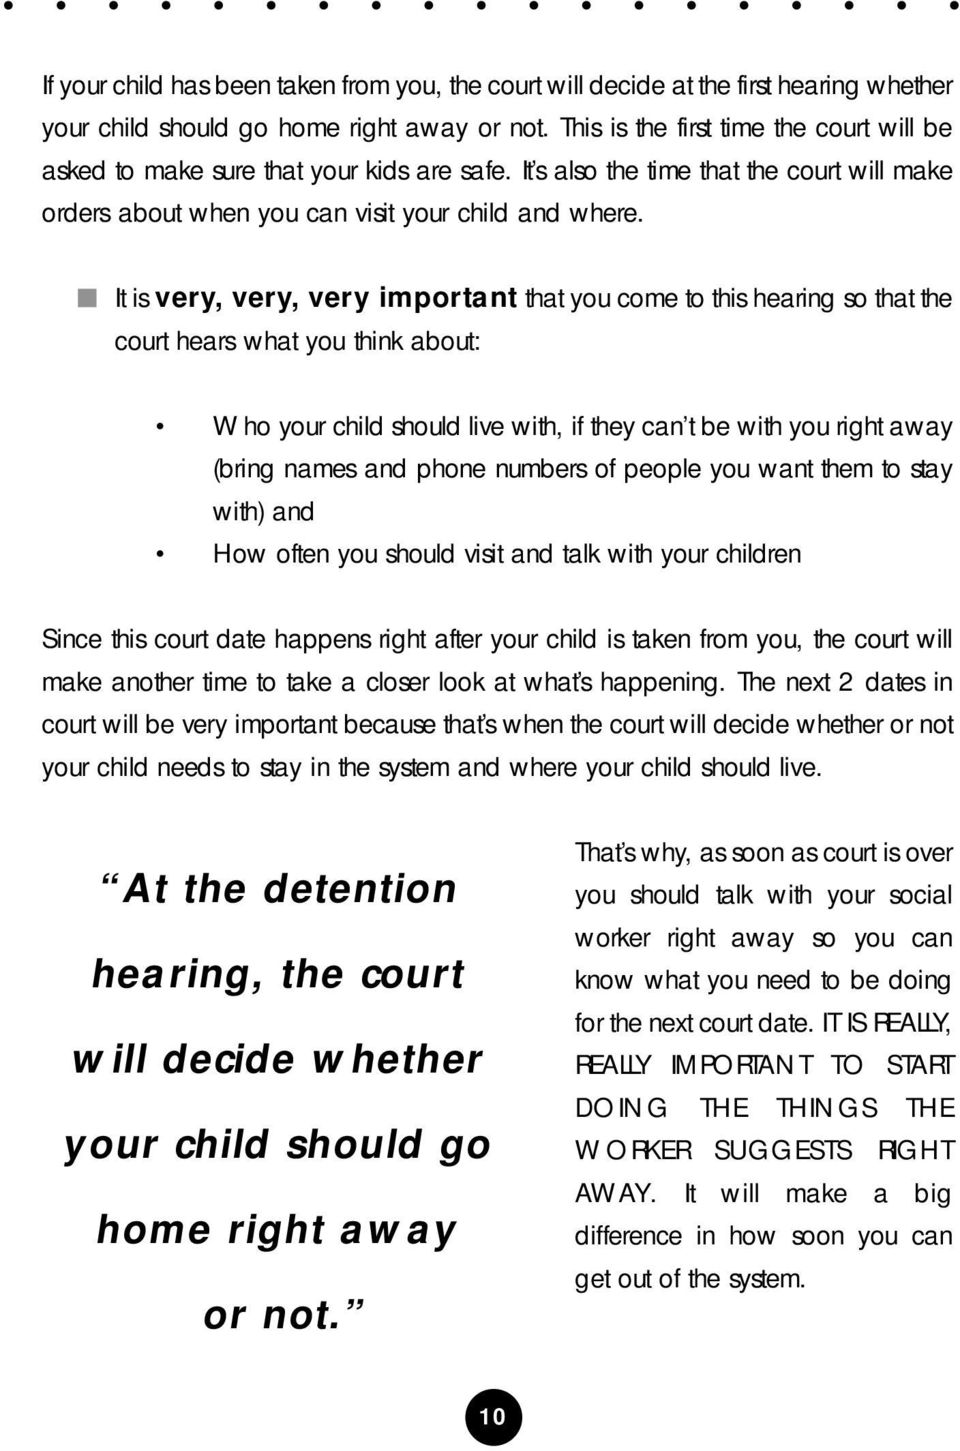 It is very, very, very important that you come to this hearing so that the court hears what you think about: Who your child should live with, if they can t be with you right away (bring names and